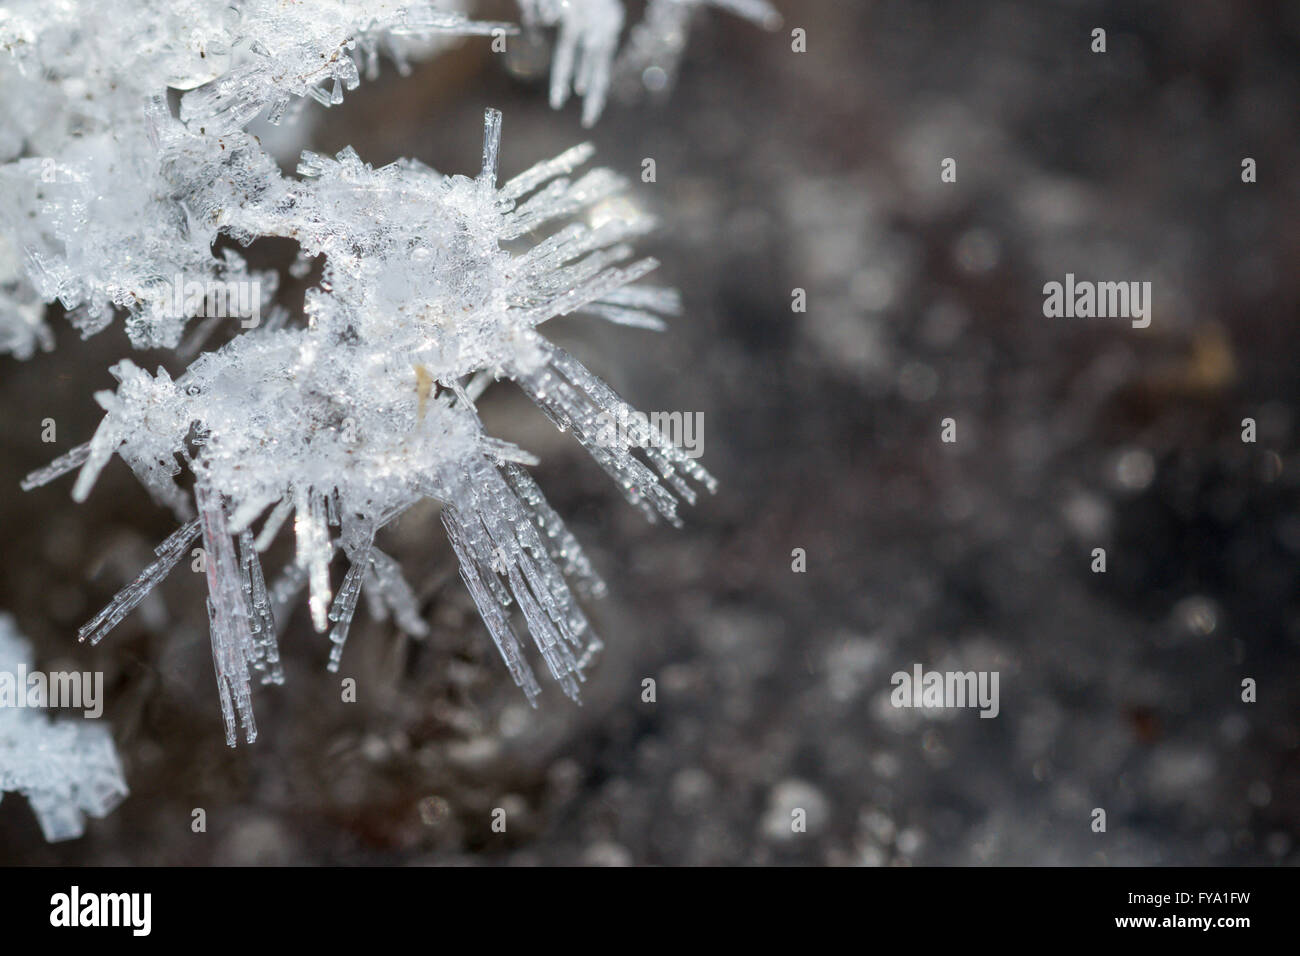 Ice crystal formation in closeup with a defocused background Stock Photo